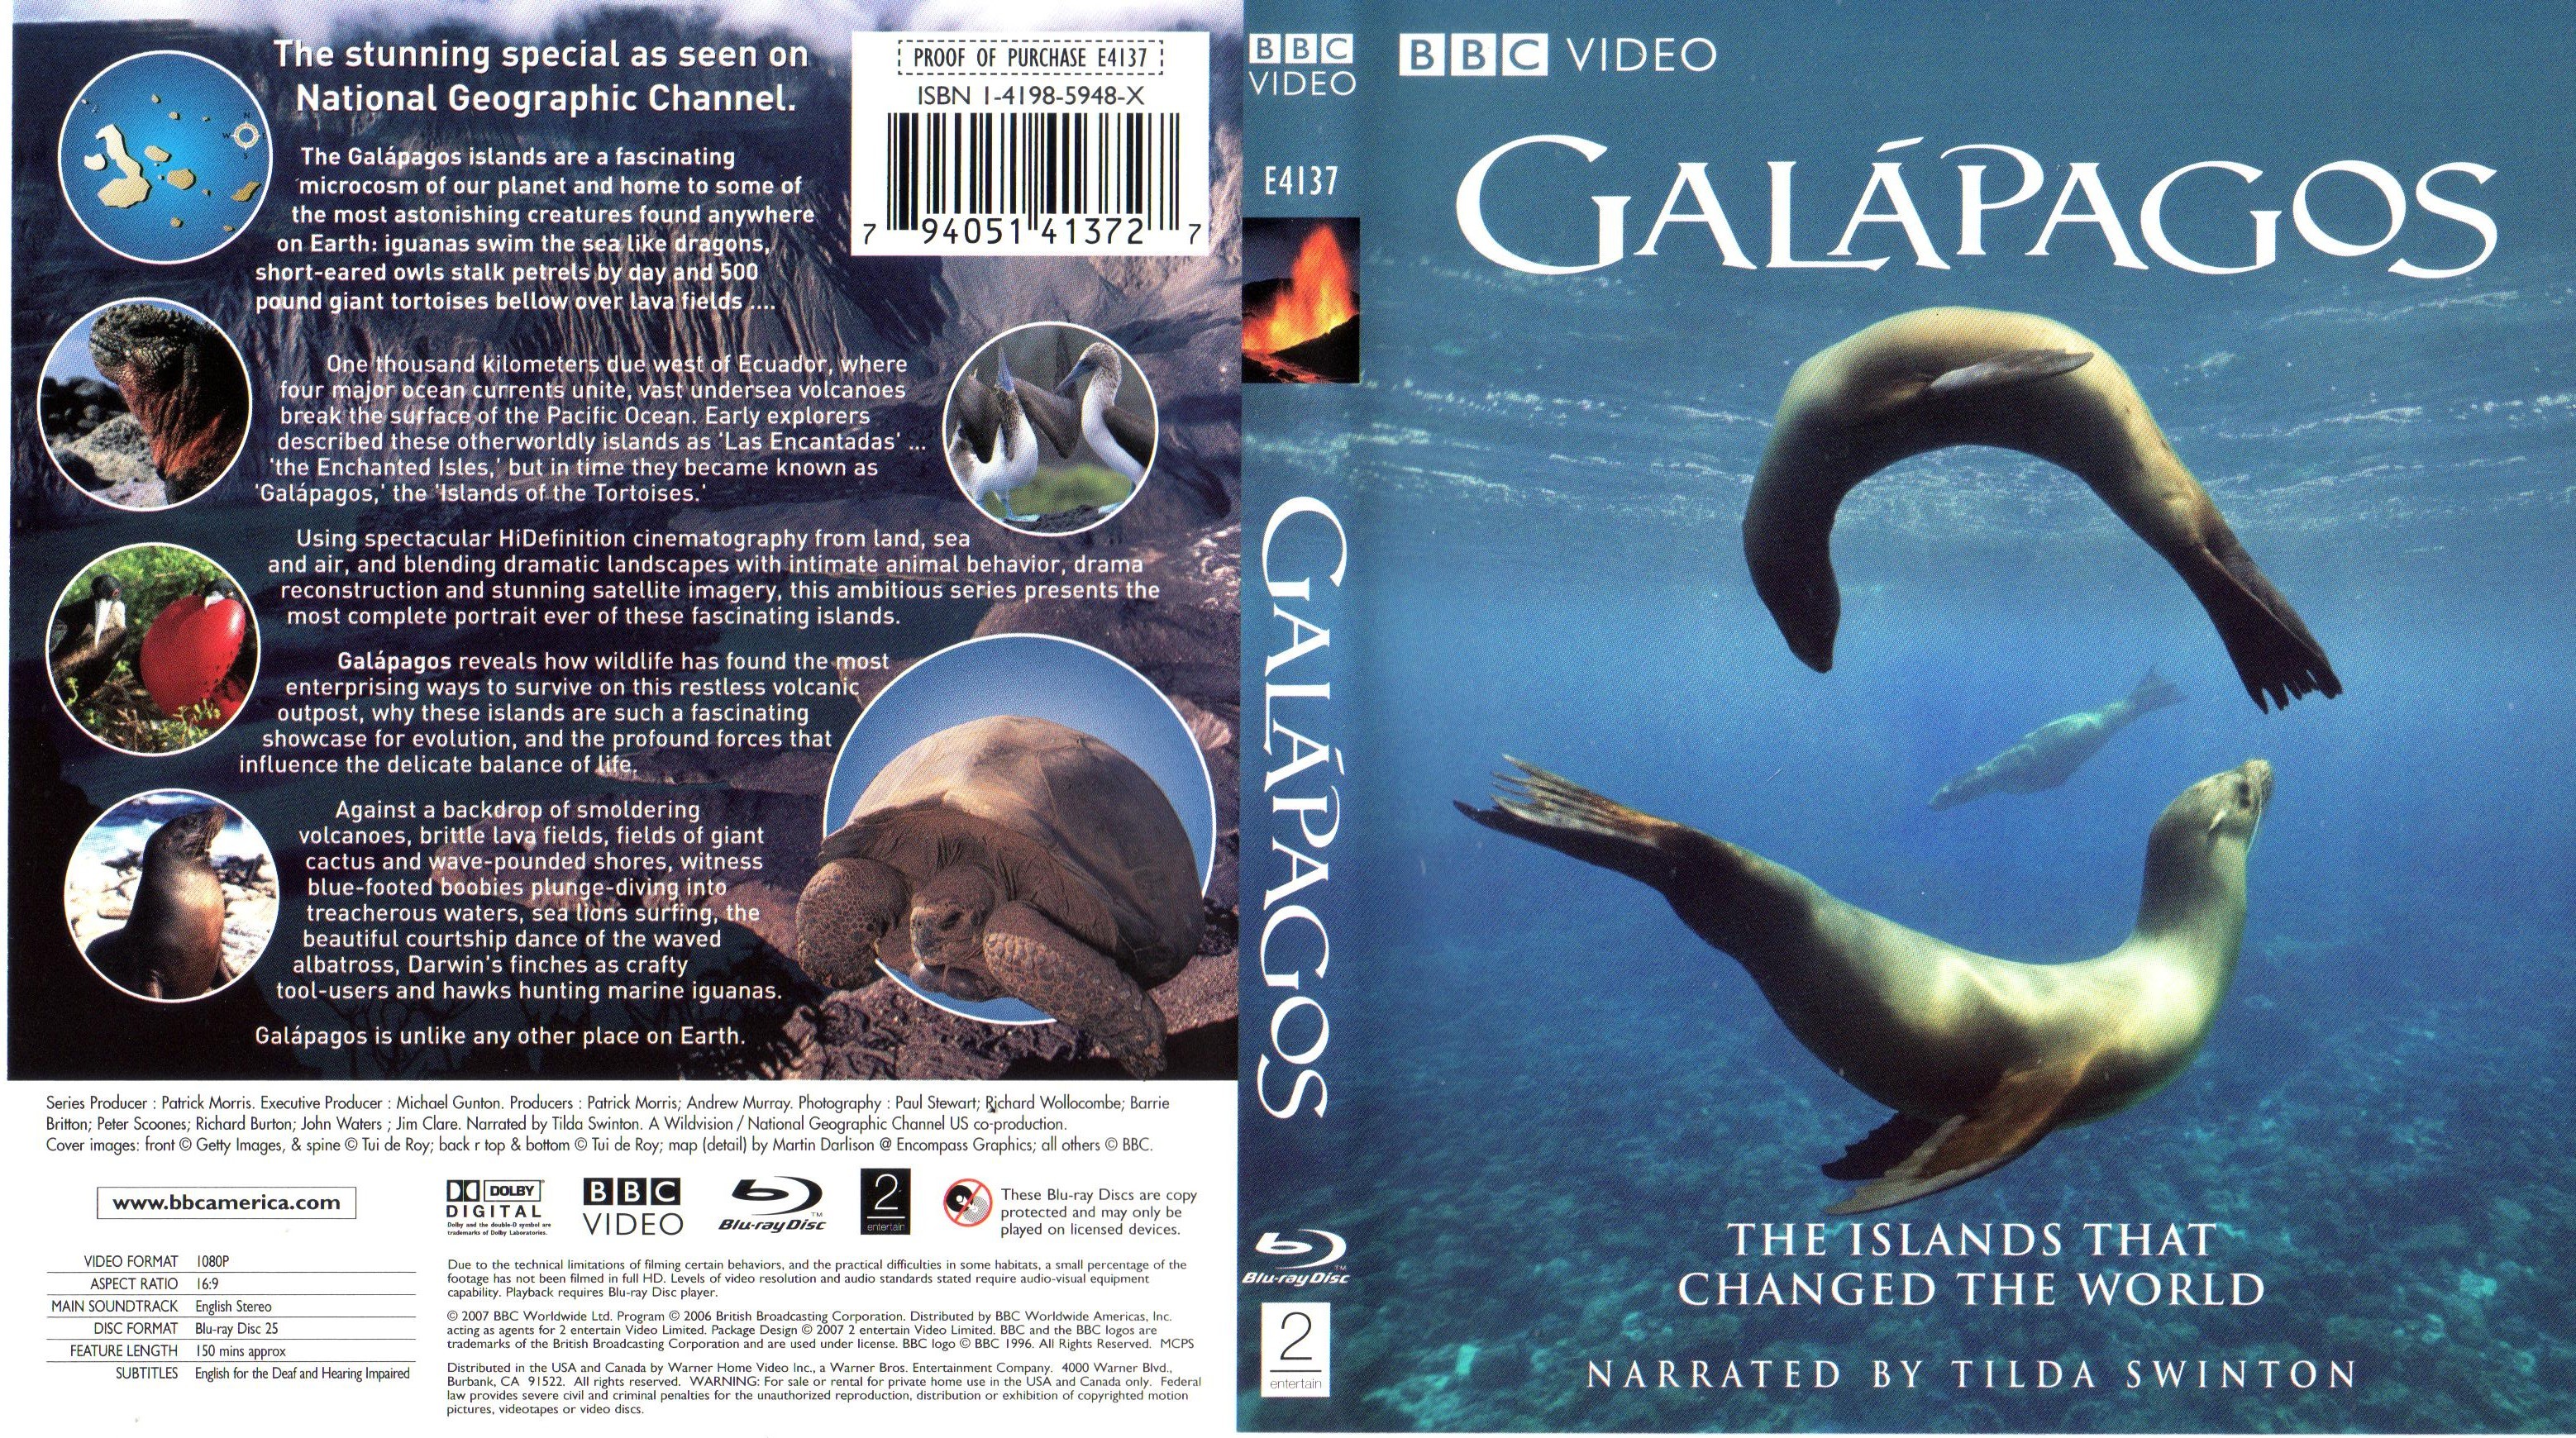 Jaquette DVD Galapagos (BLU-RAY)